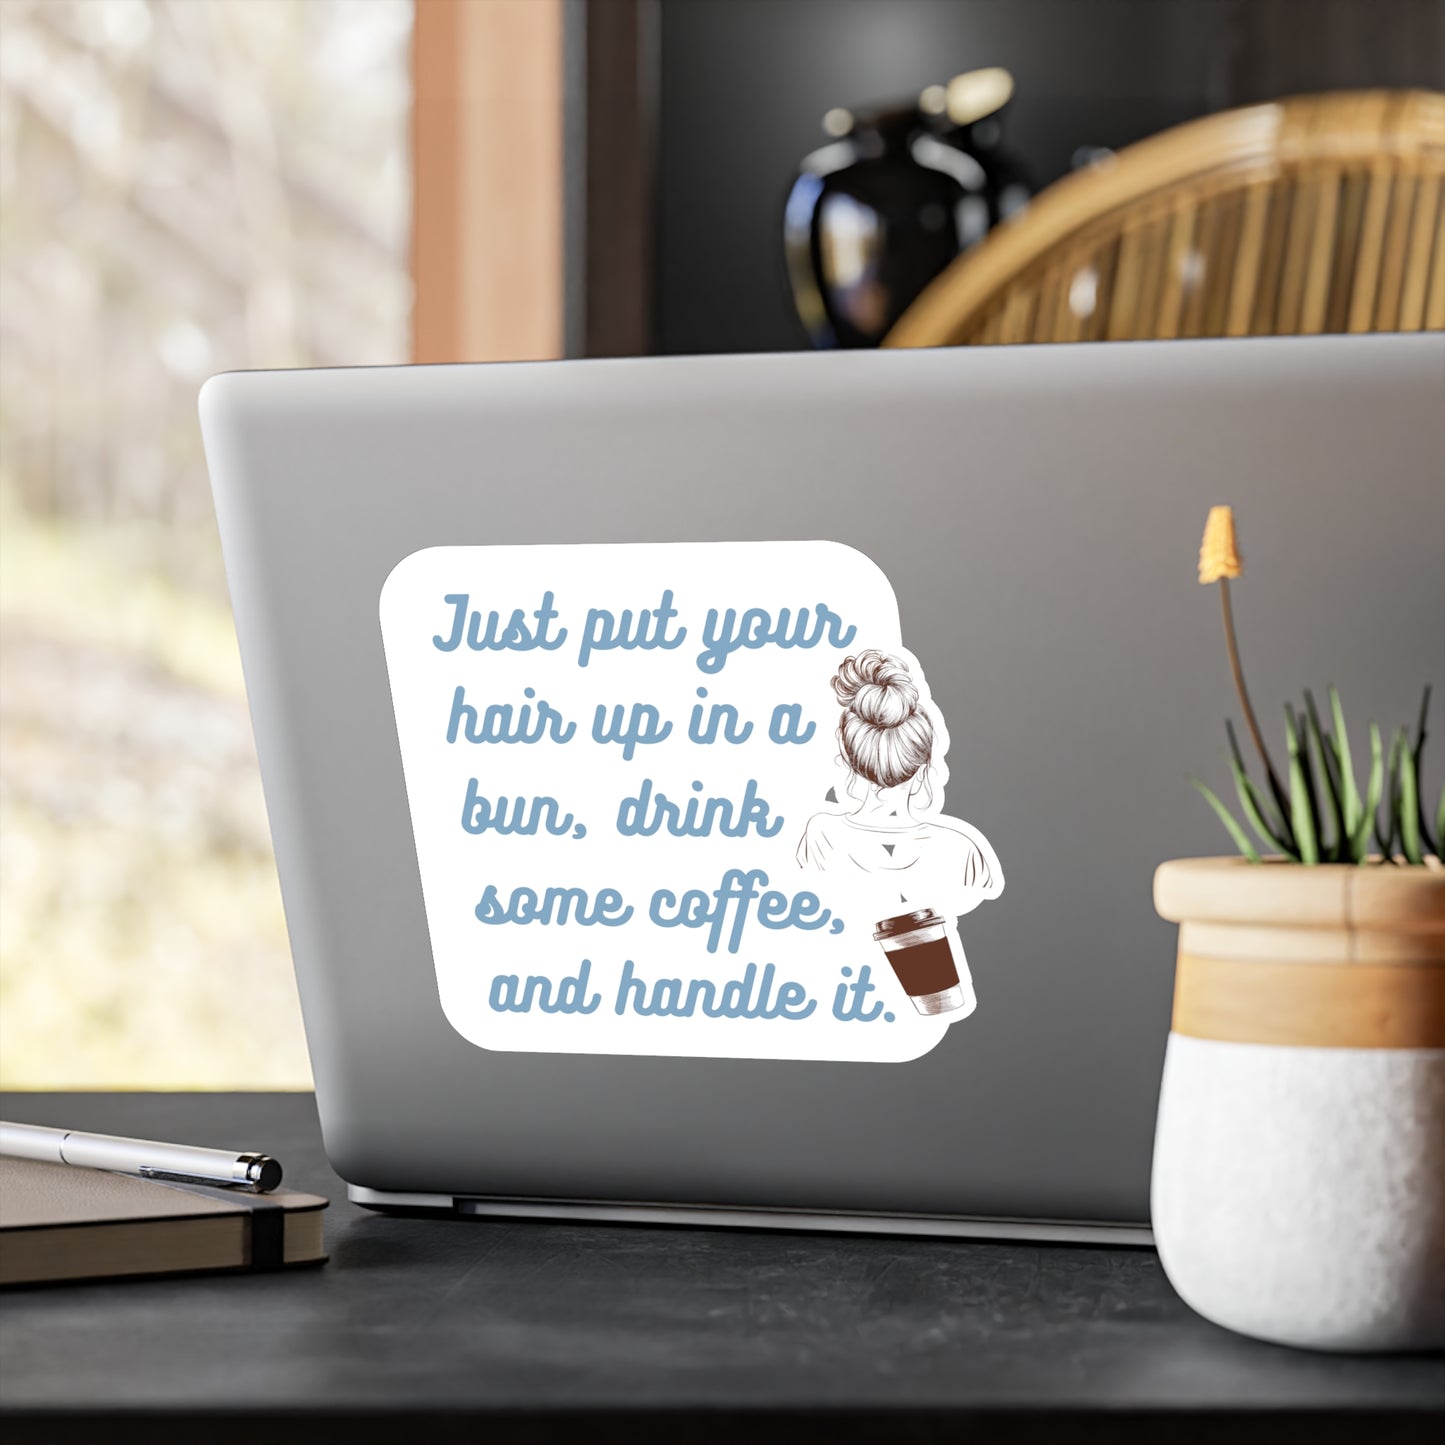 Just put your hair up in a bun, drink some coffee, and handle it | Sticker, Coffee, Bun, Hair, Funny, Girl